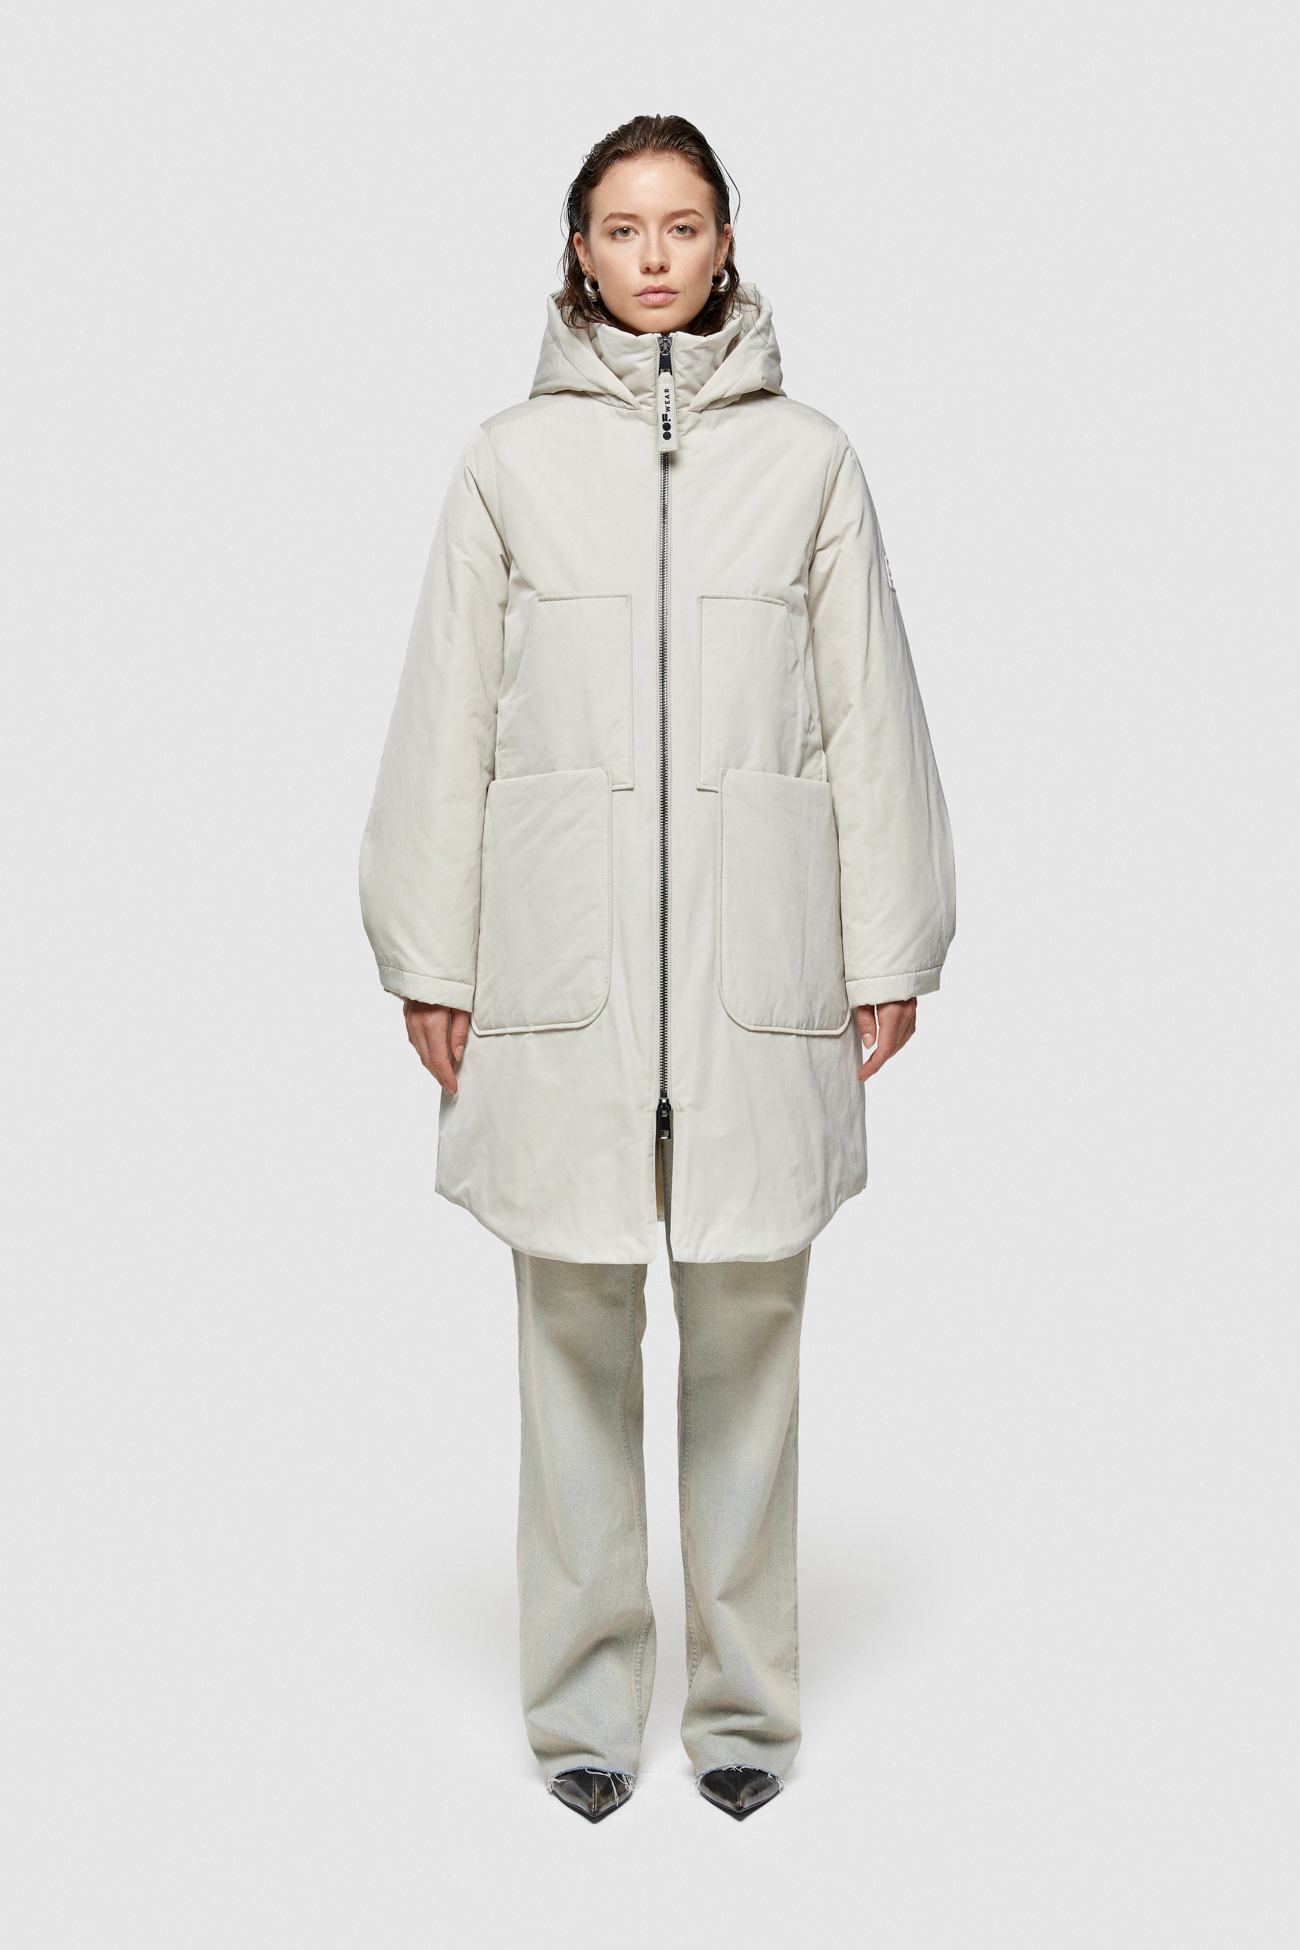 PARKA LUNGO 9094 IN NYLON MEMORY  - PANNA - OOF WEAR